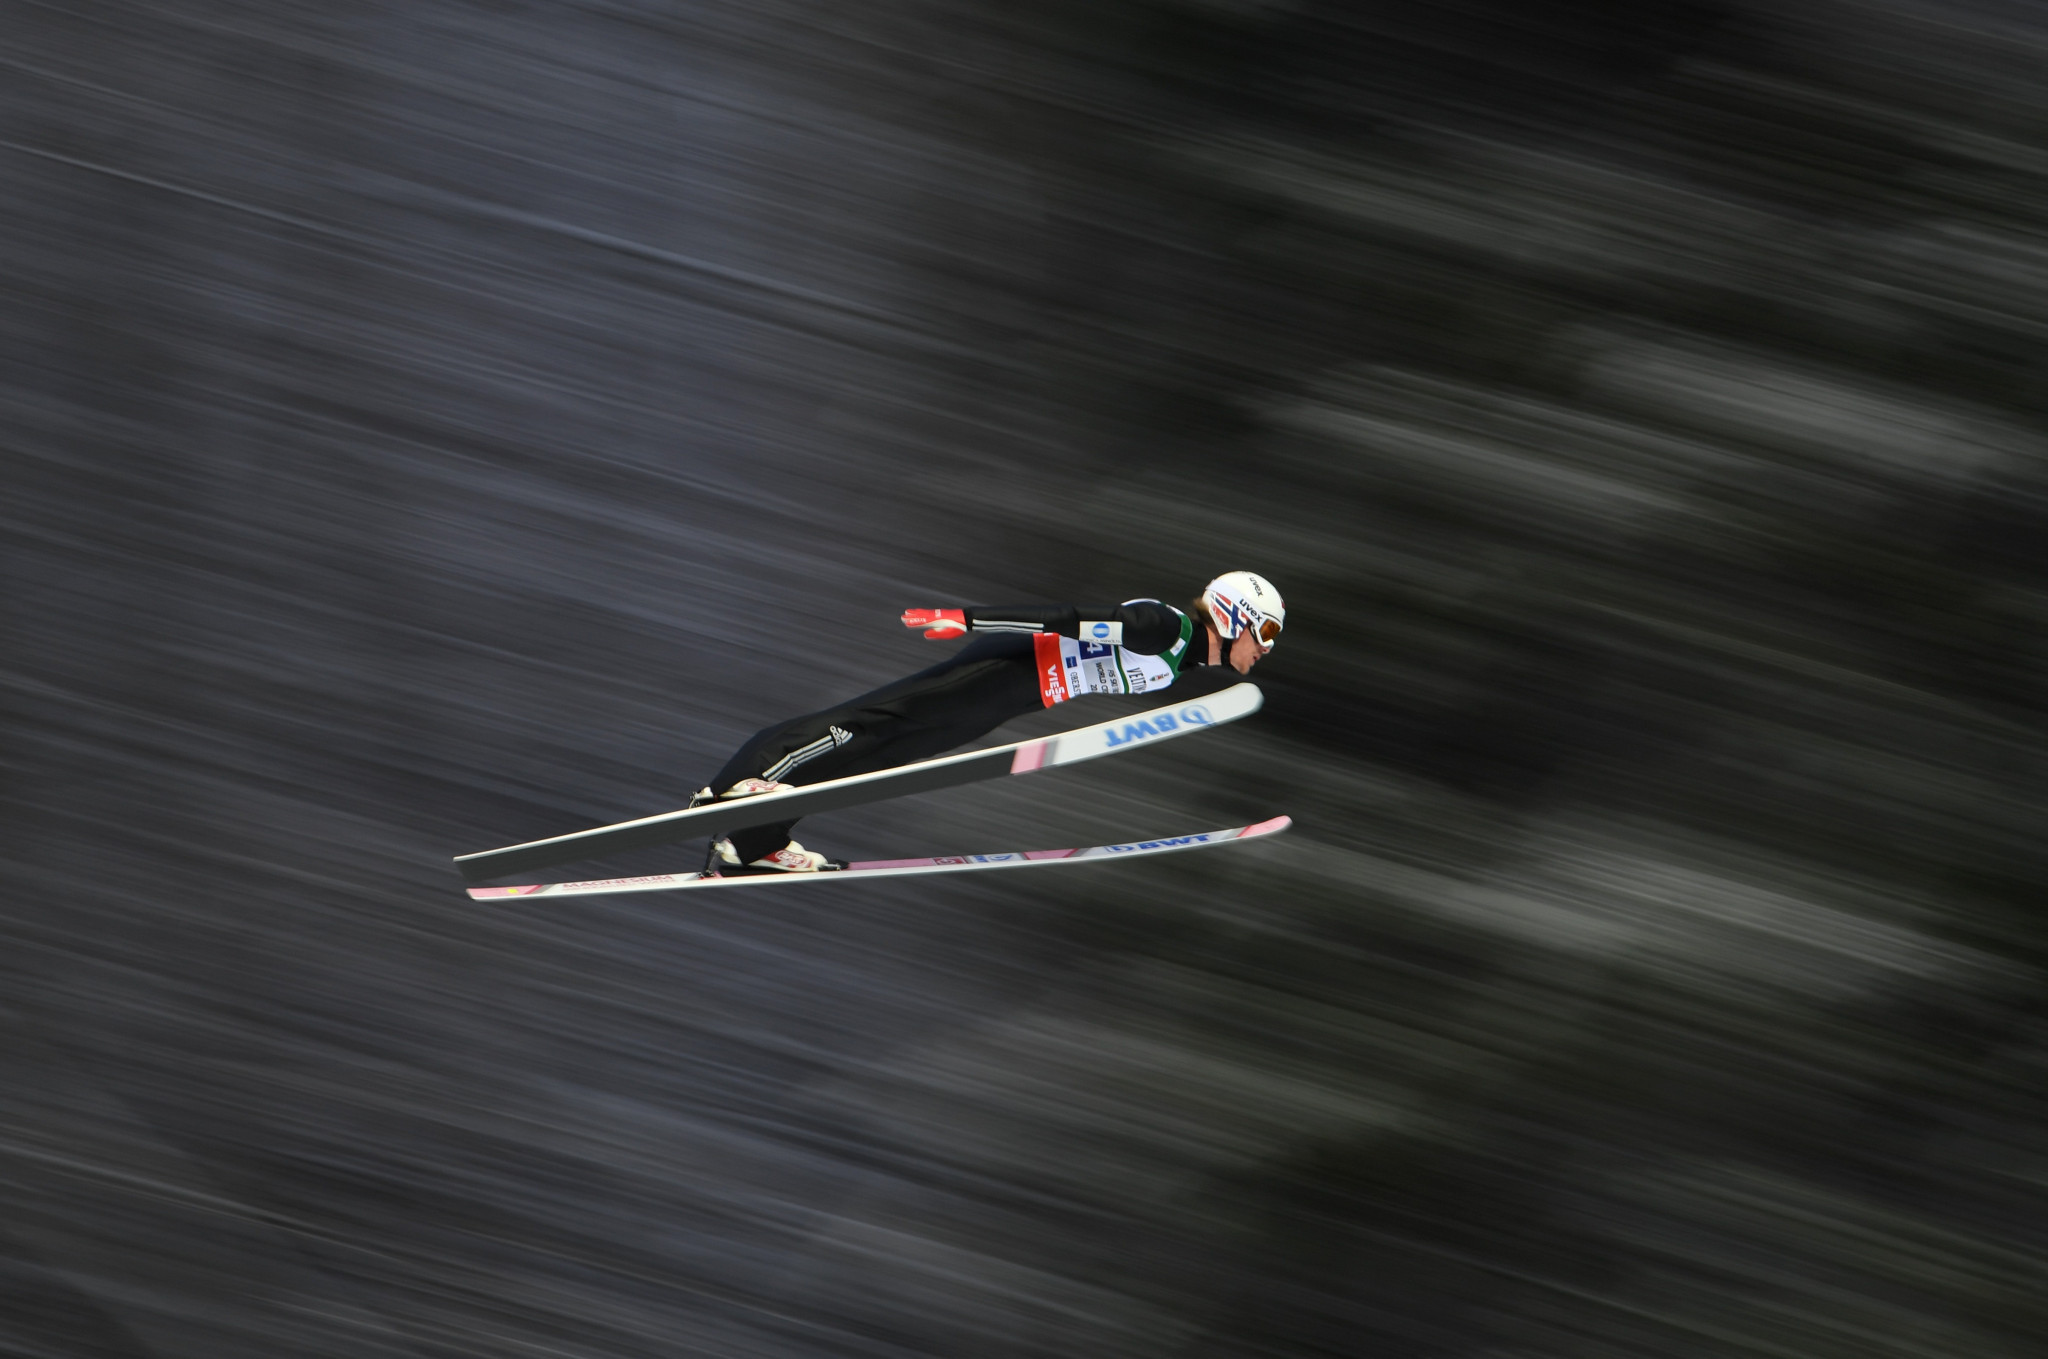 Norway’s Daniel Andre Tande held off the challenge of home favourite Richard Freitag to claim his first victory of the FIS Ski Jumping World Cup season in Willingen in Germany today ©Getty Images